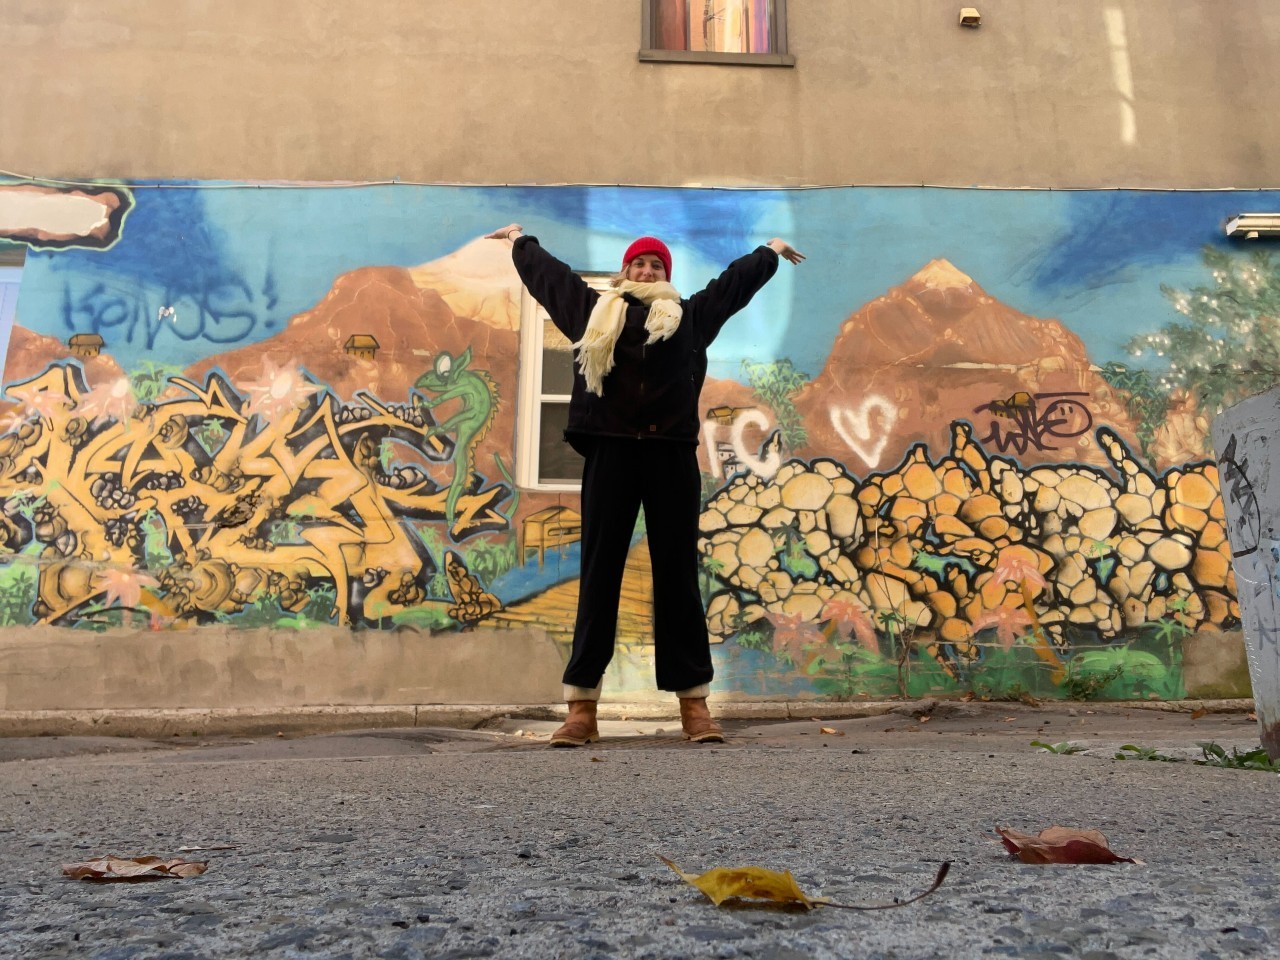 Amidst a November cold day, Jules mentor stands in front of Montreal street art with winter gear and her hands up. 